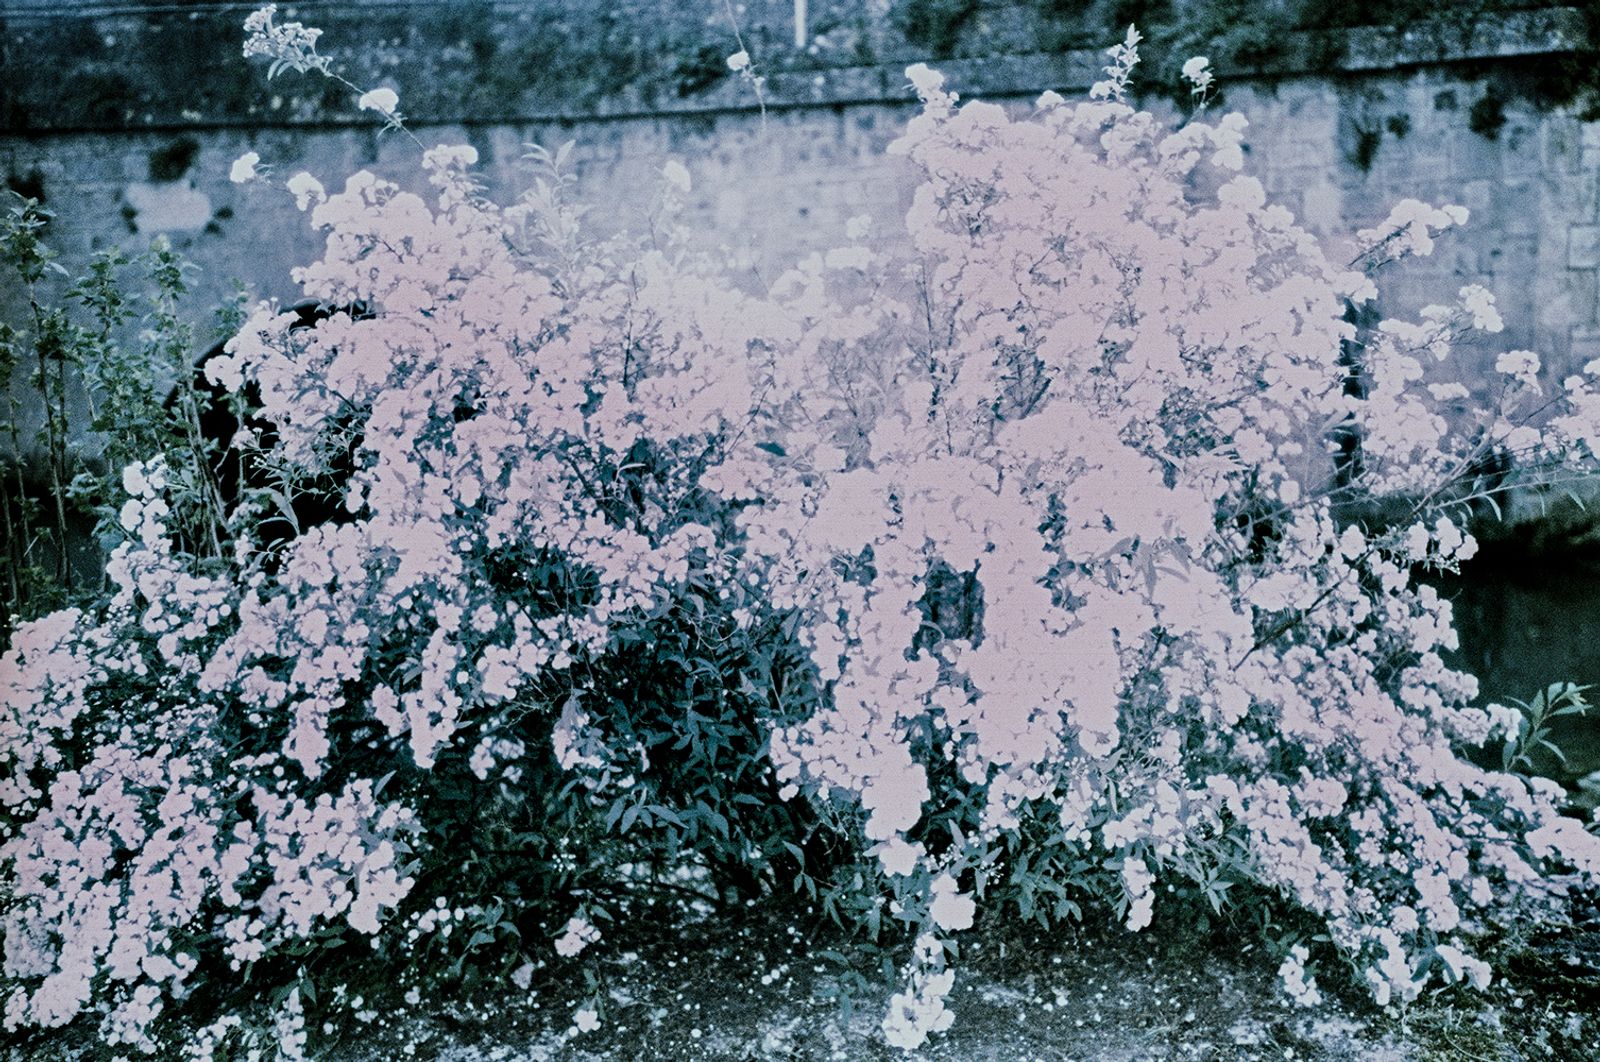 © Clara Chichin - Image from the The back of trees photography project